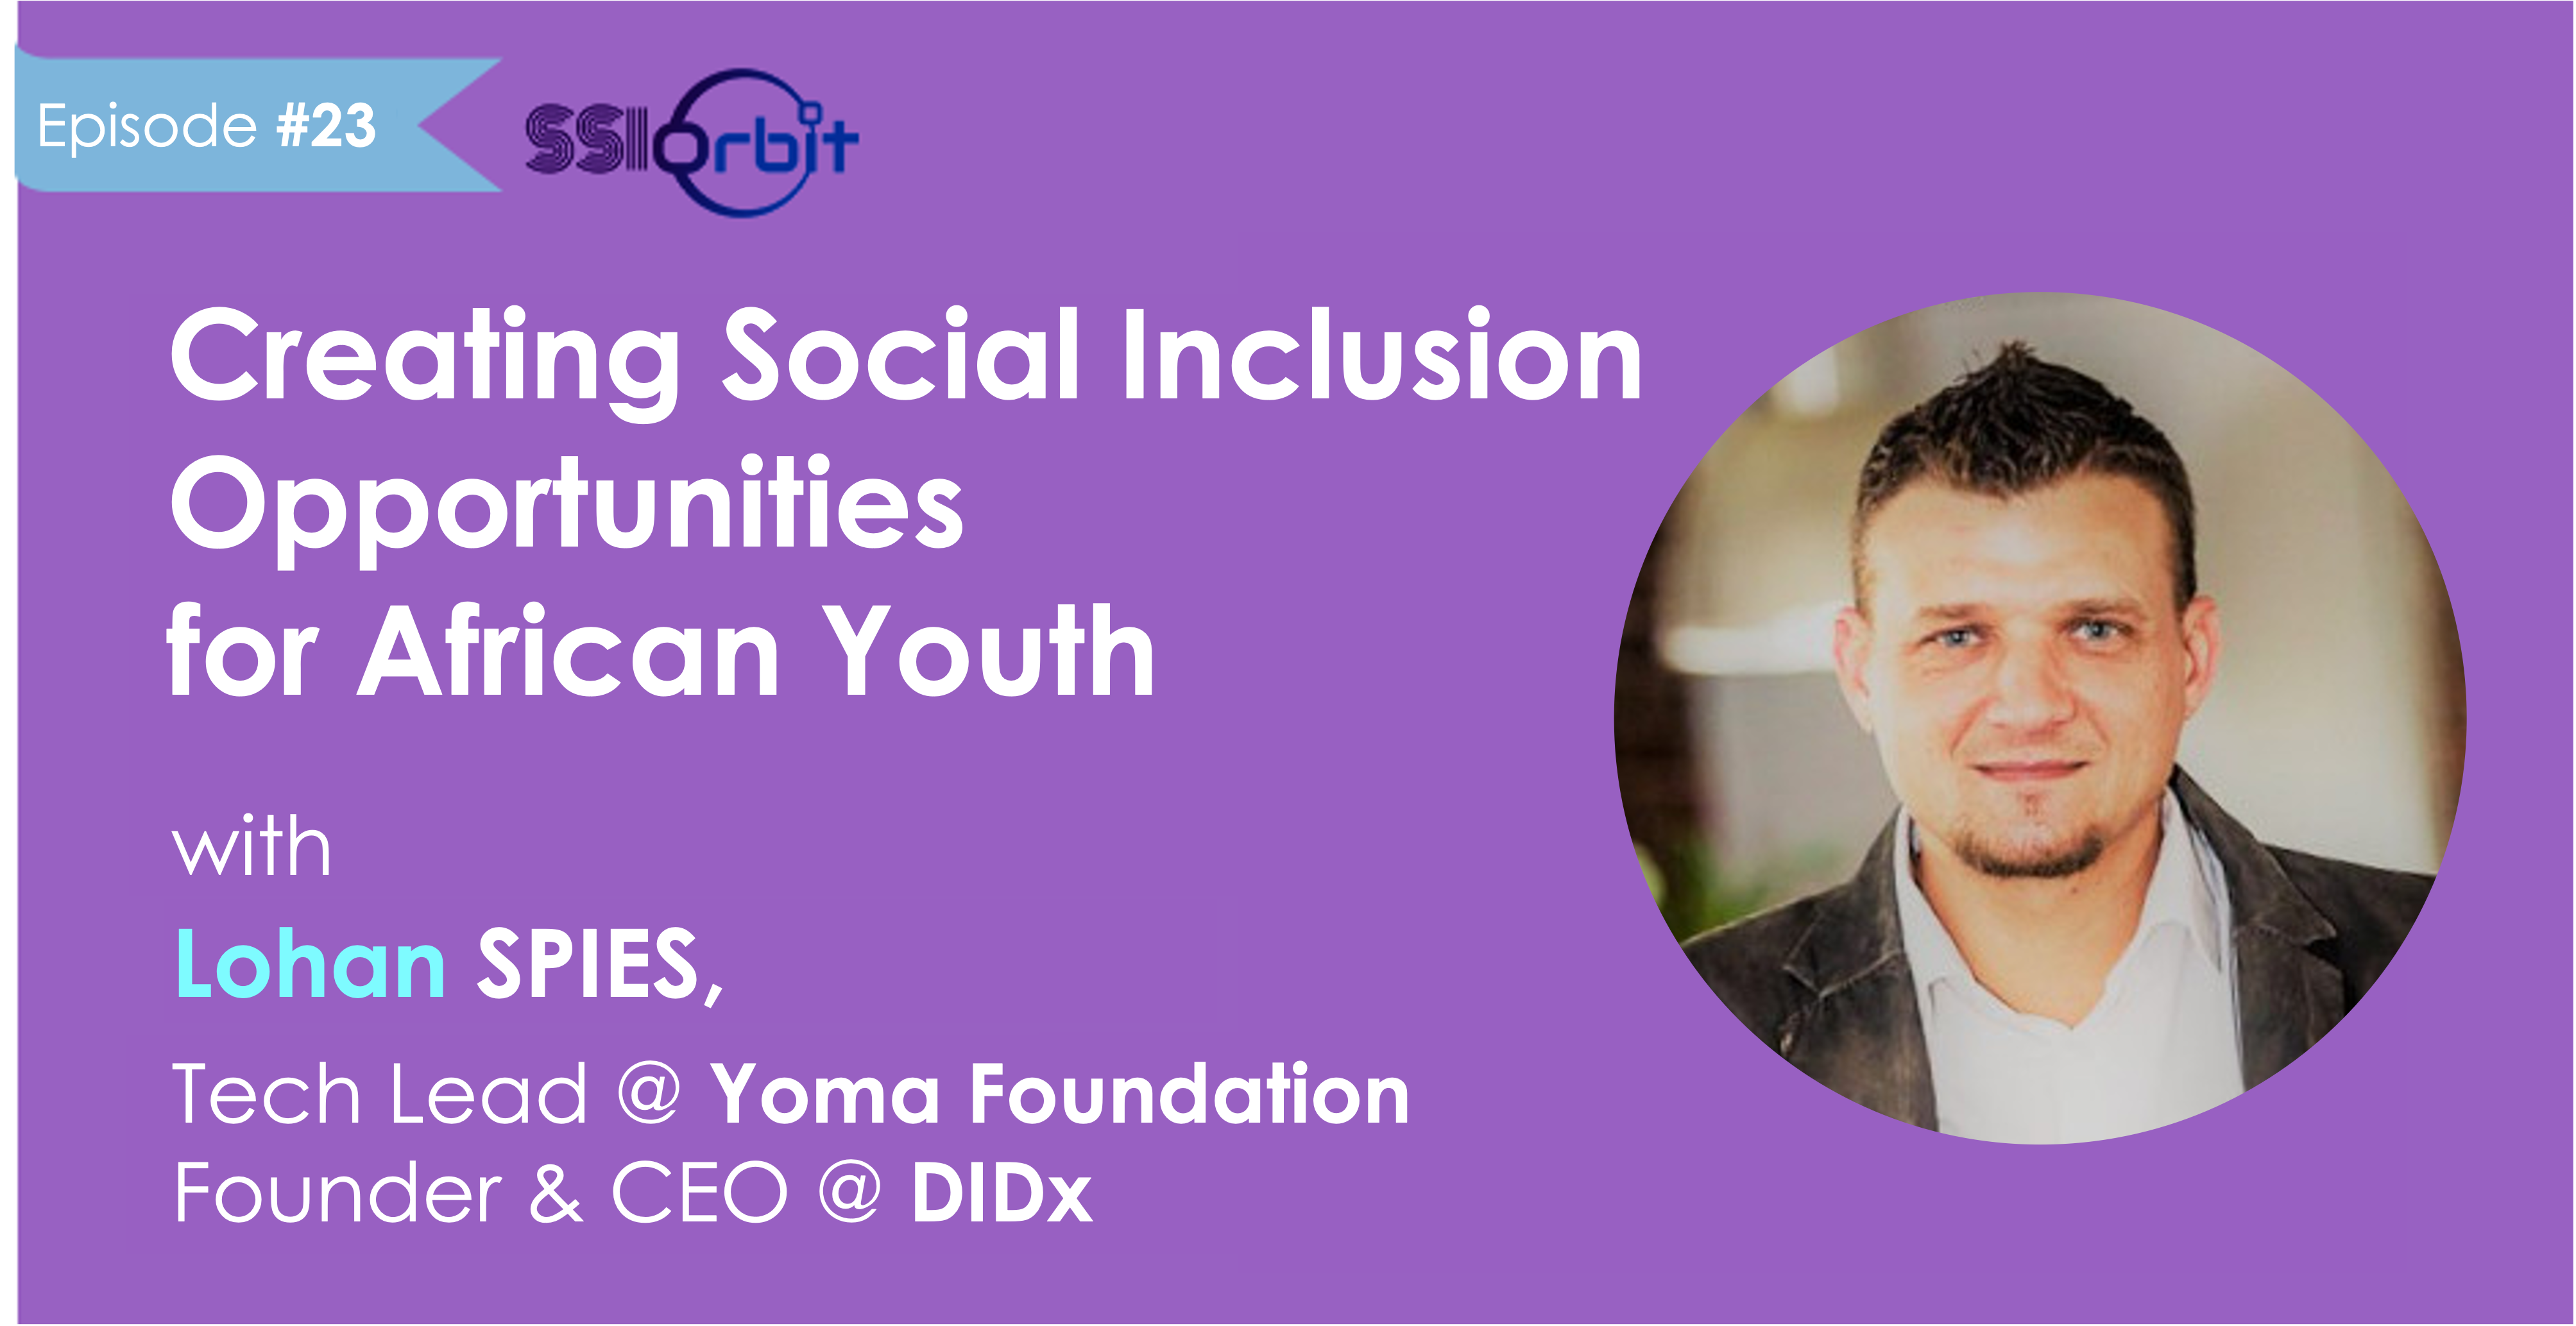 Creating Social Inclusion Opportunities for African Youth with Lohan Spies